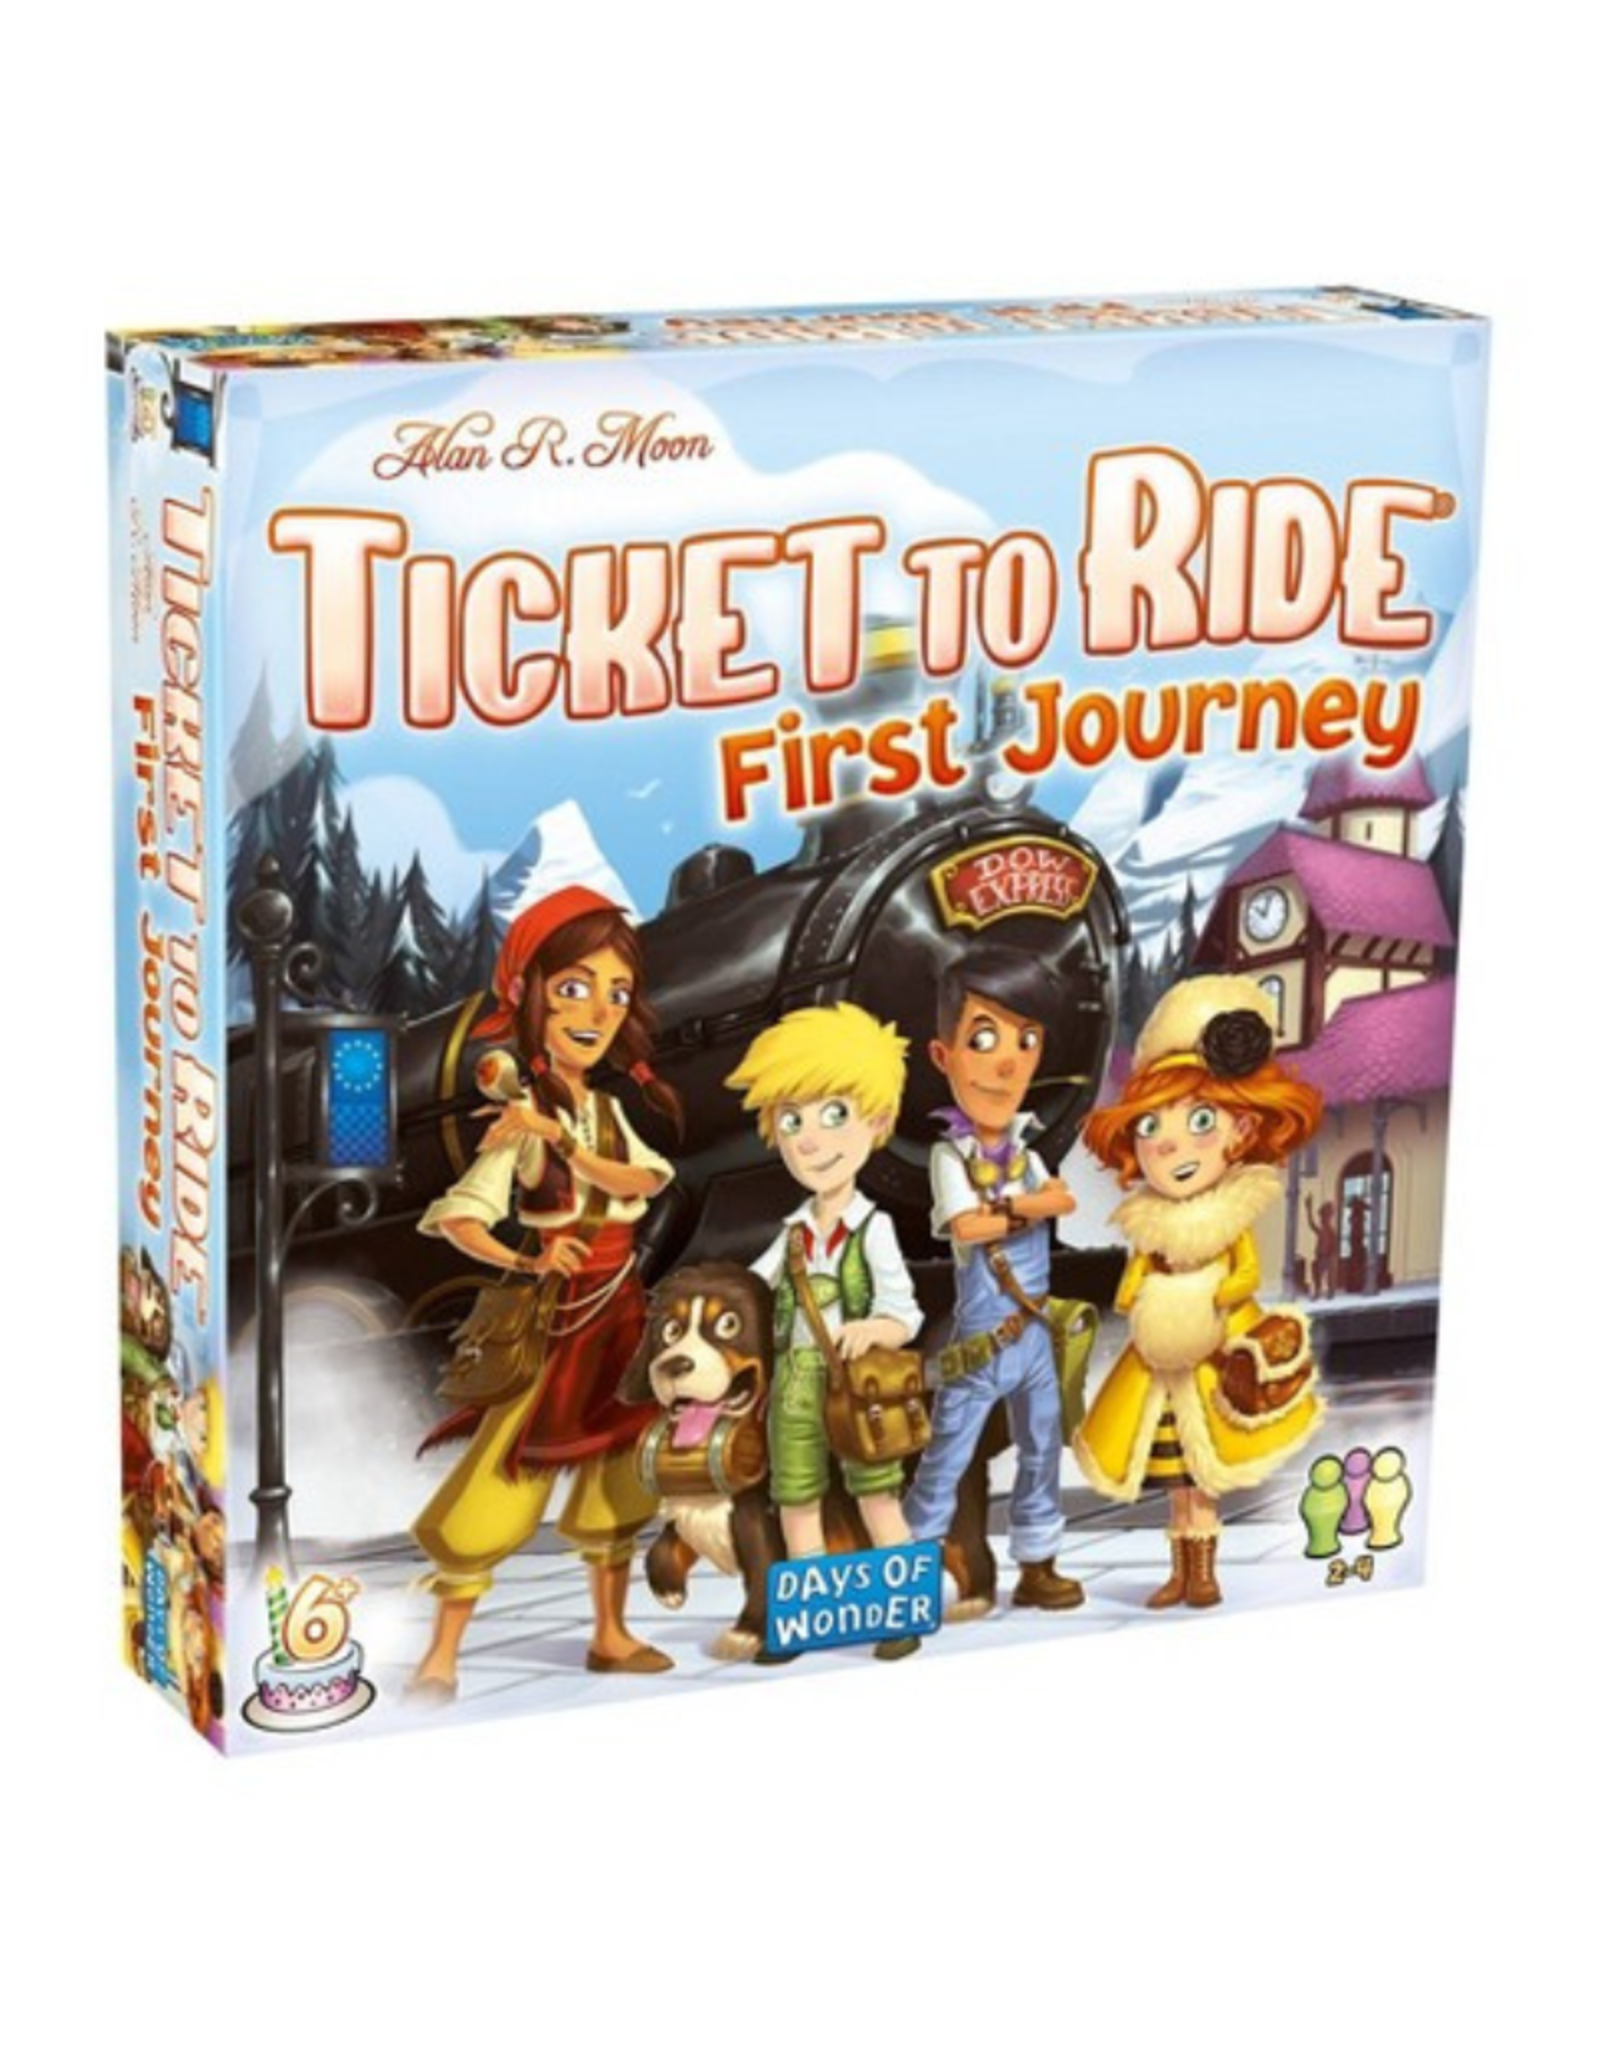 Ticket to Ride: Europe - First Journey